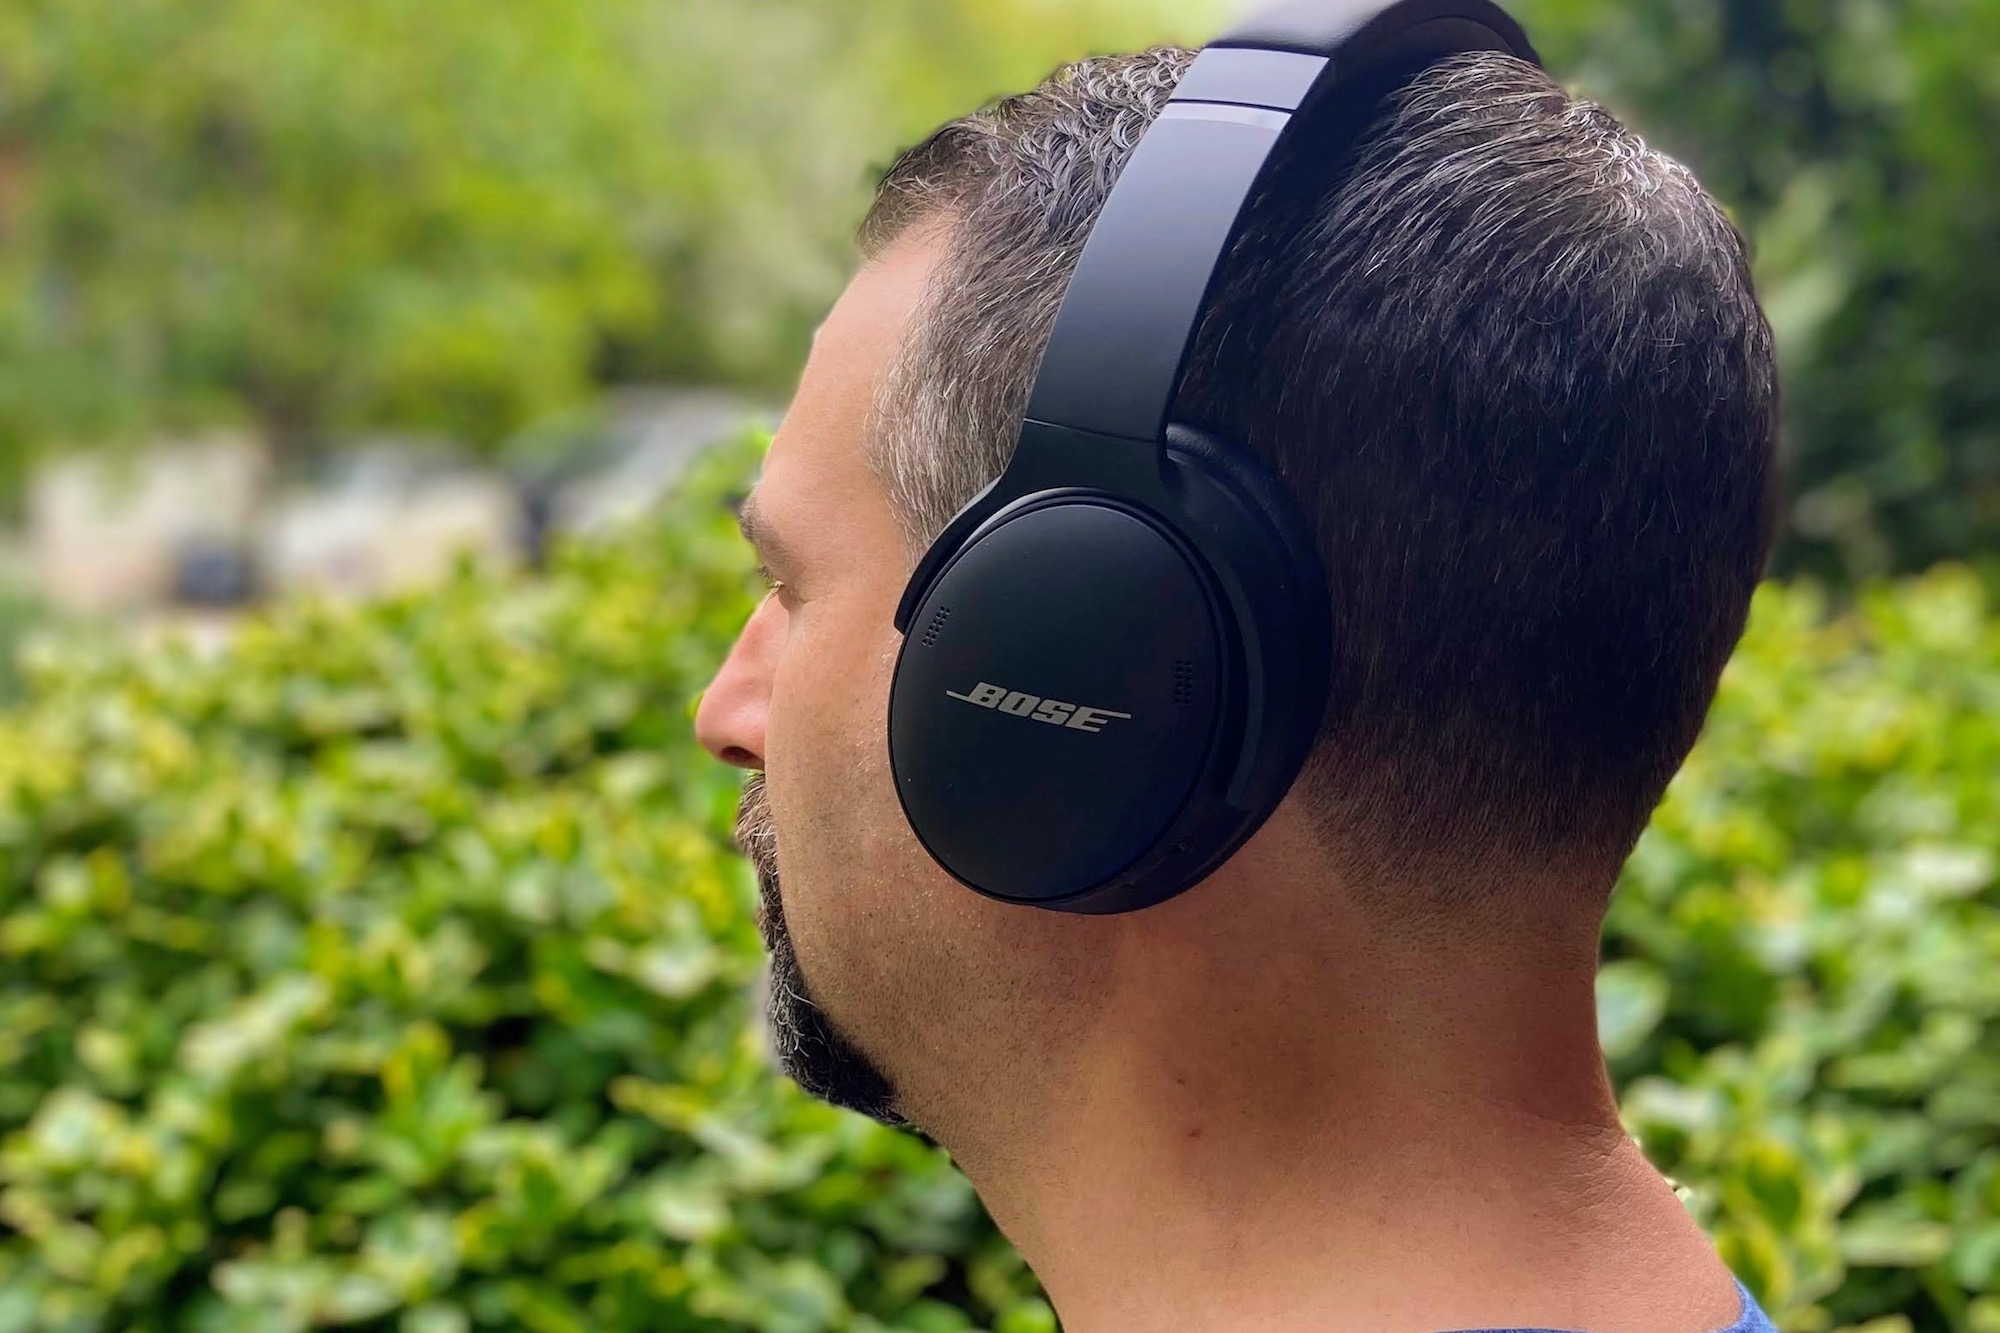 All 3 New Bose Headphones Compared/Reviewed 